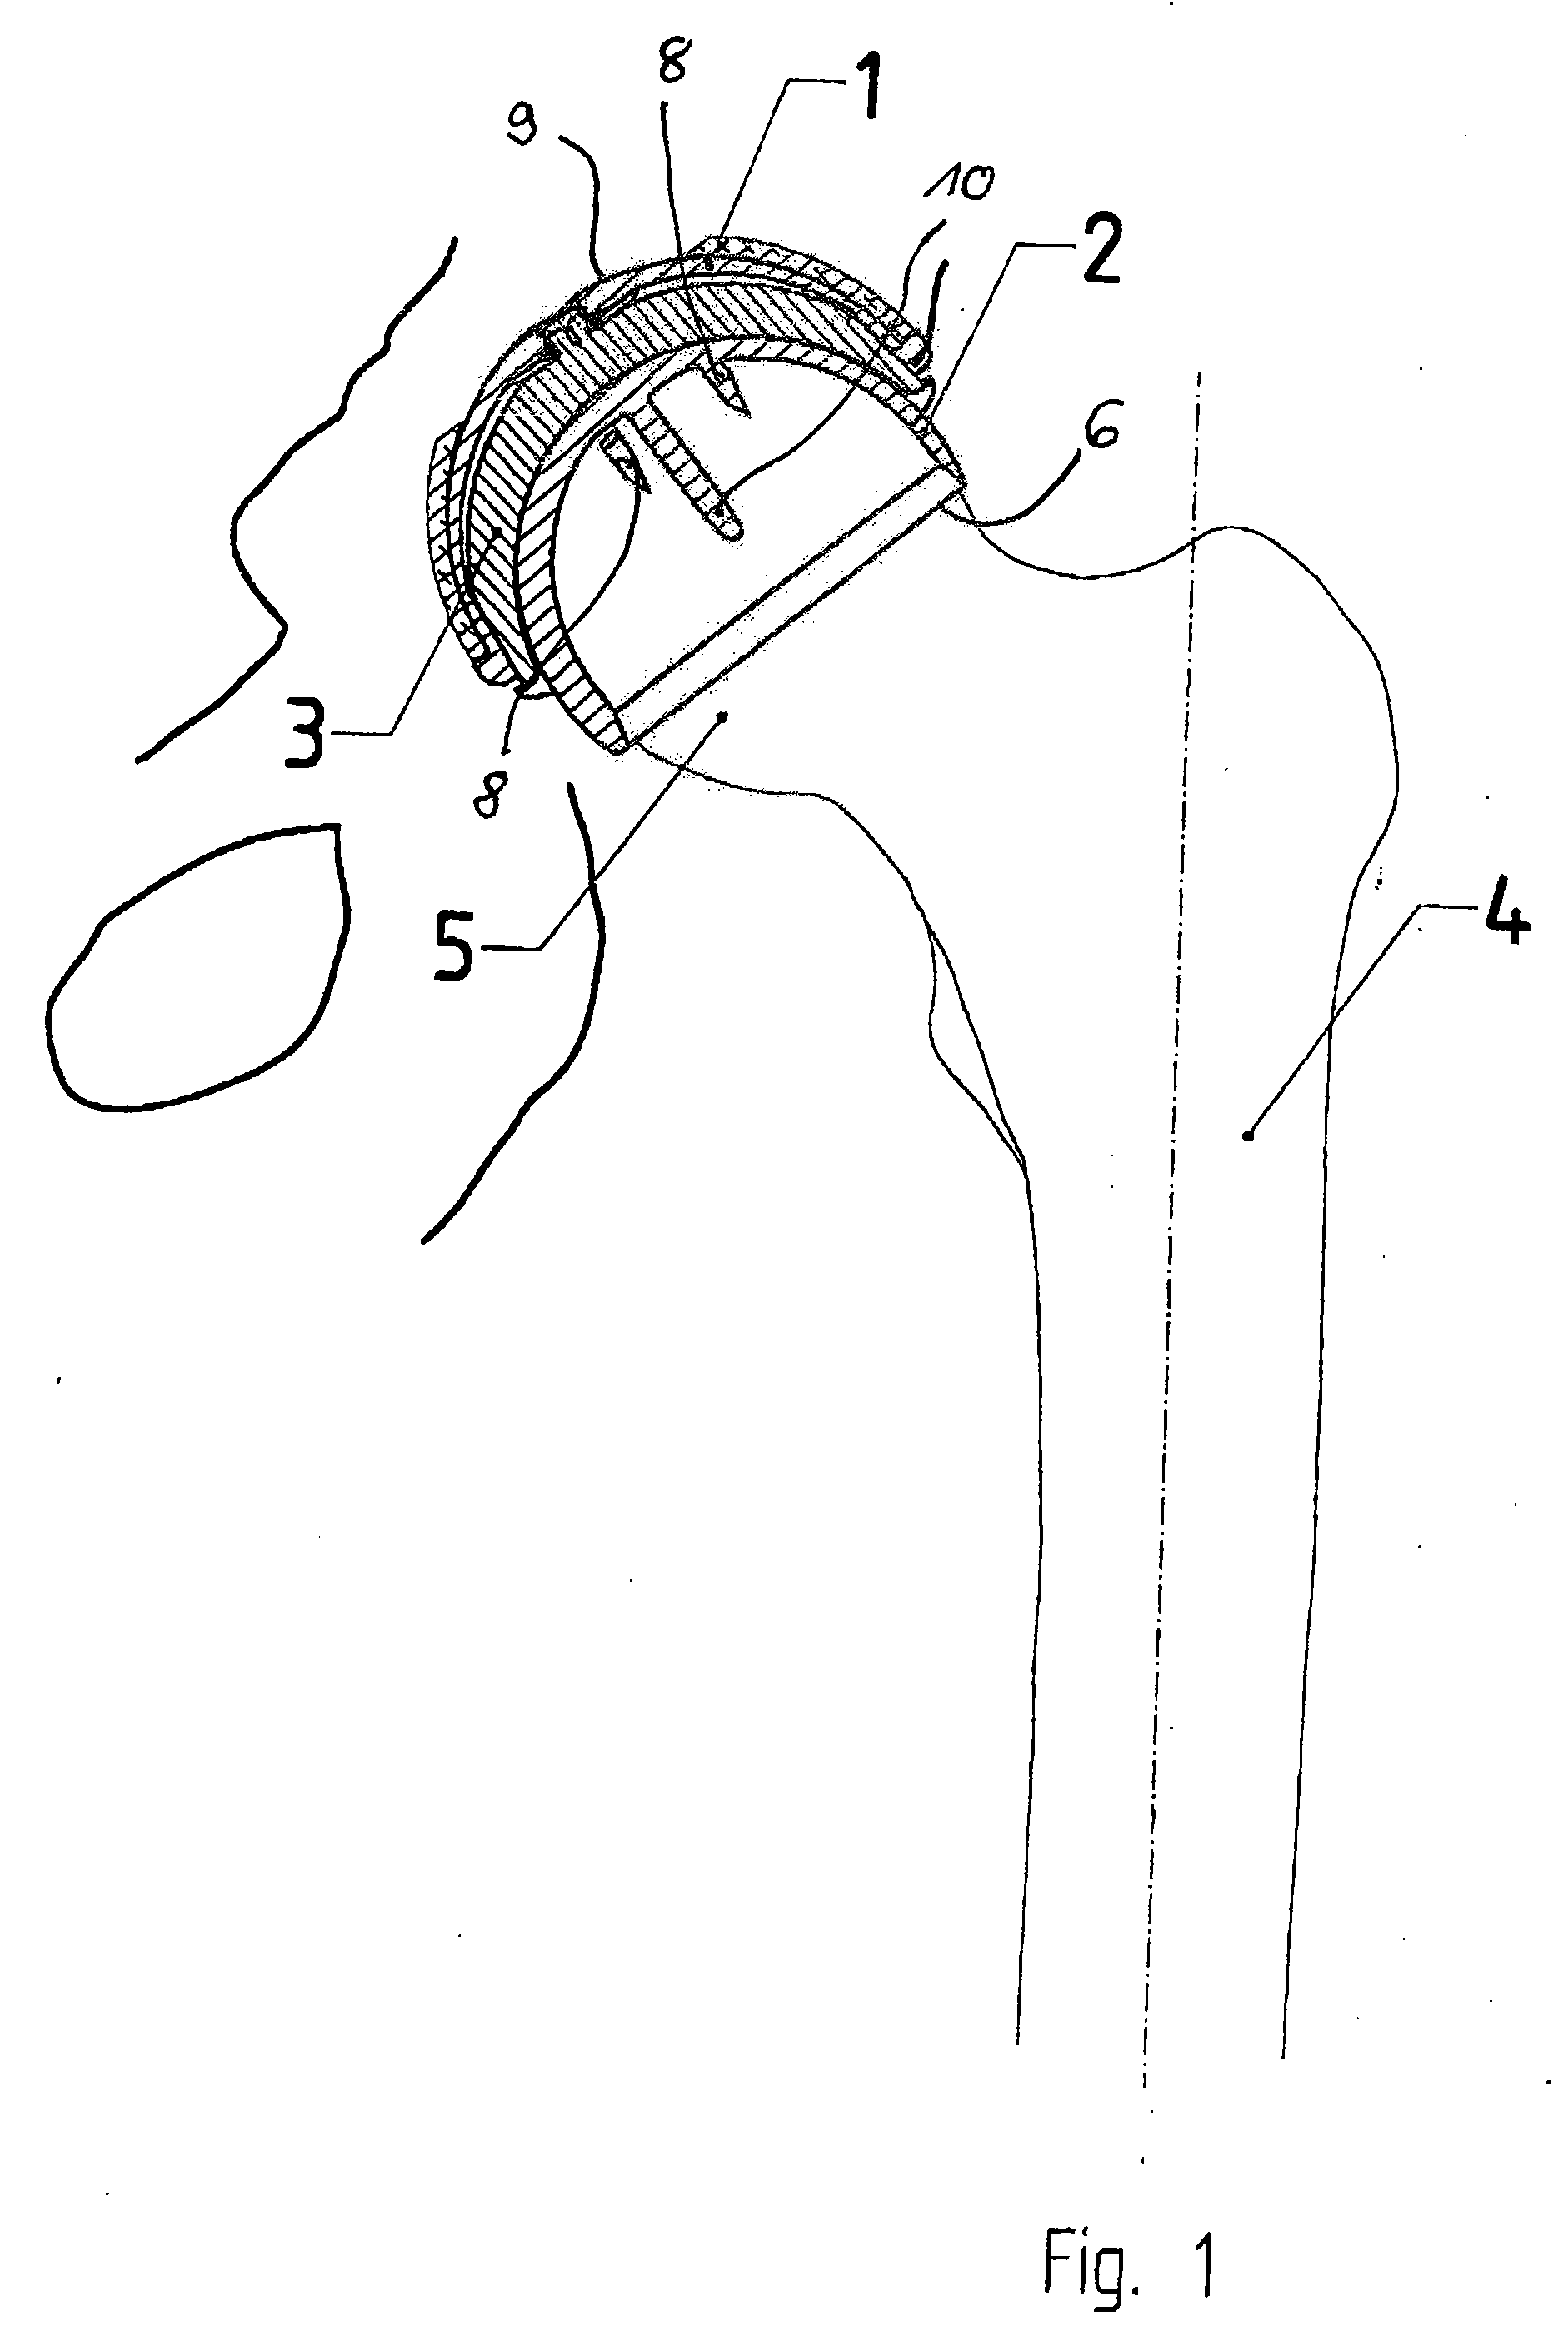 Set For Creating An Offset-Resurfacing Hip-Joint Implant